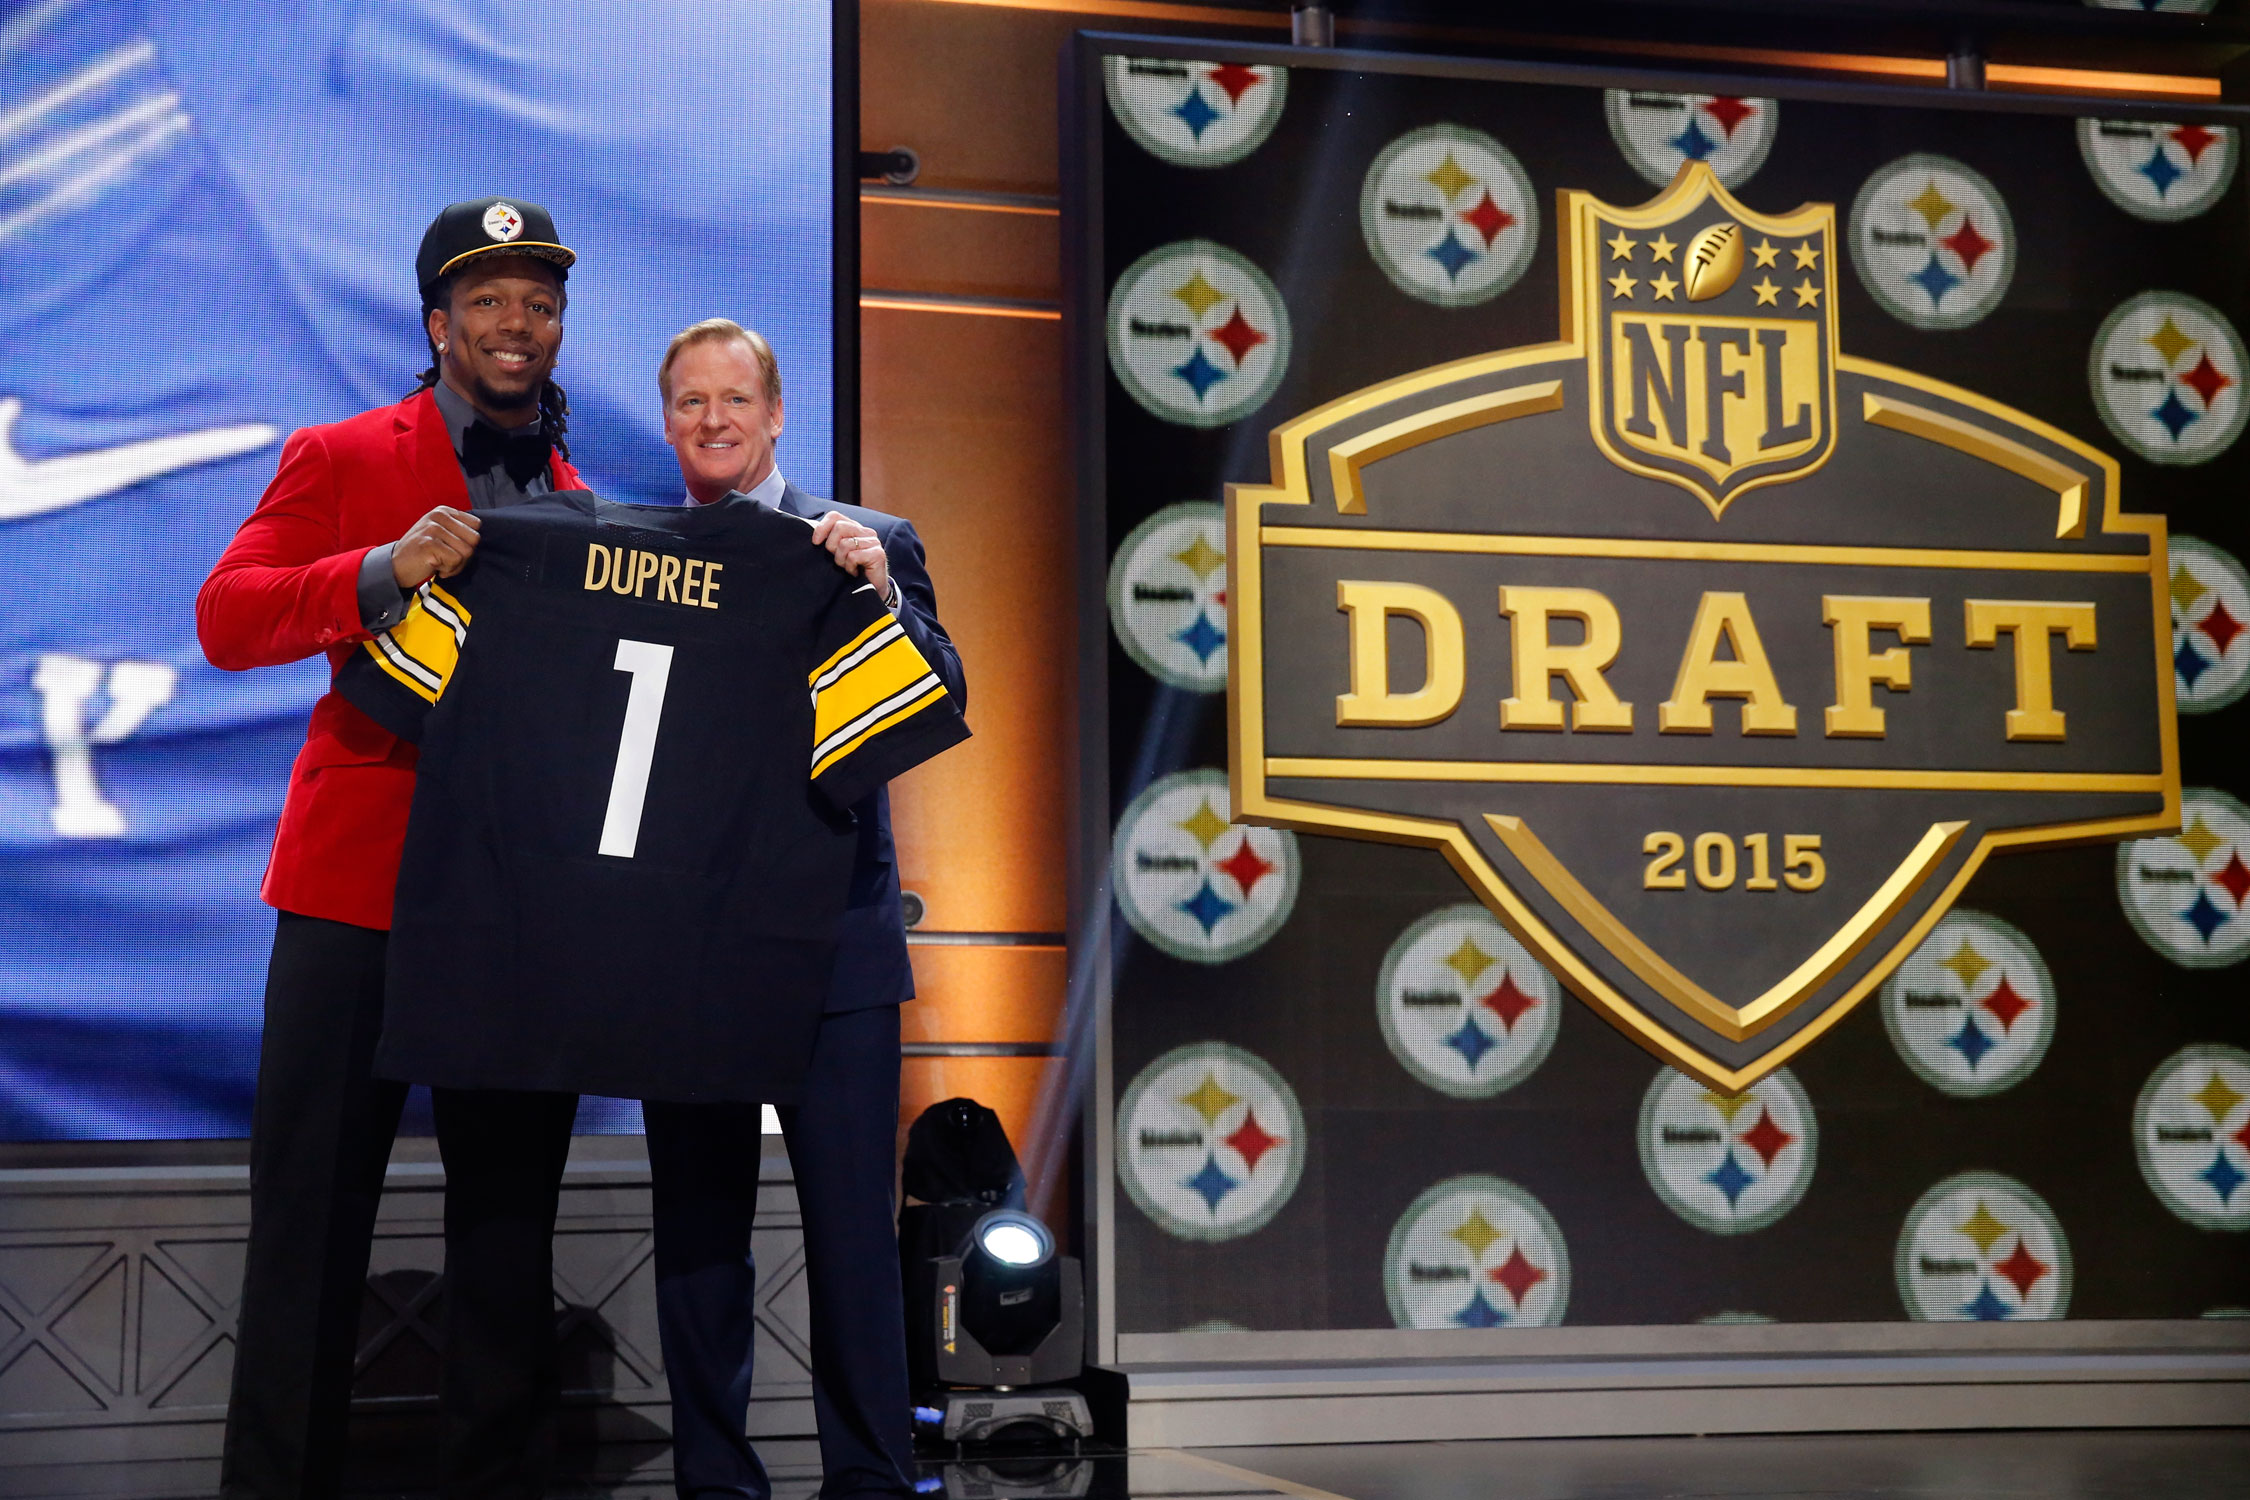 A guide to surviving the rest of the NFL Draft